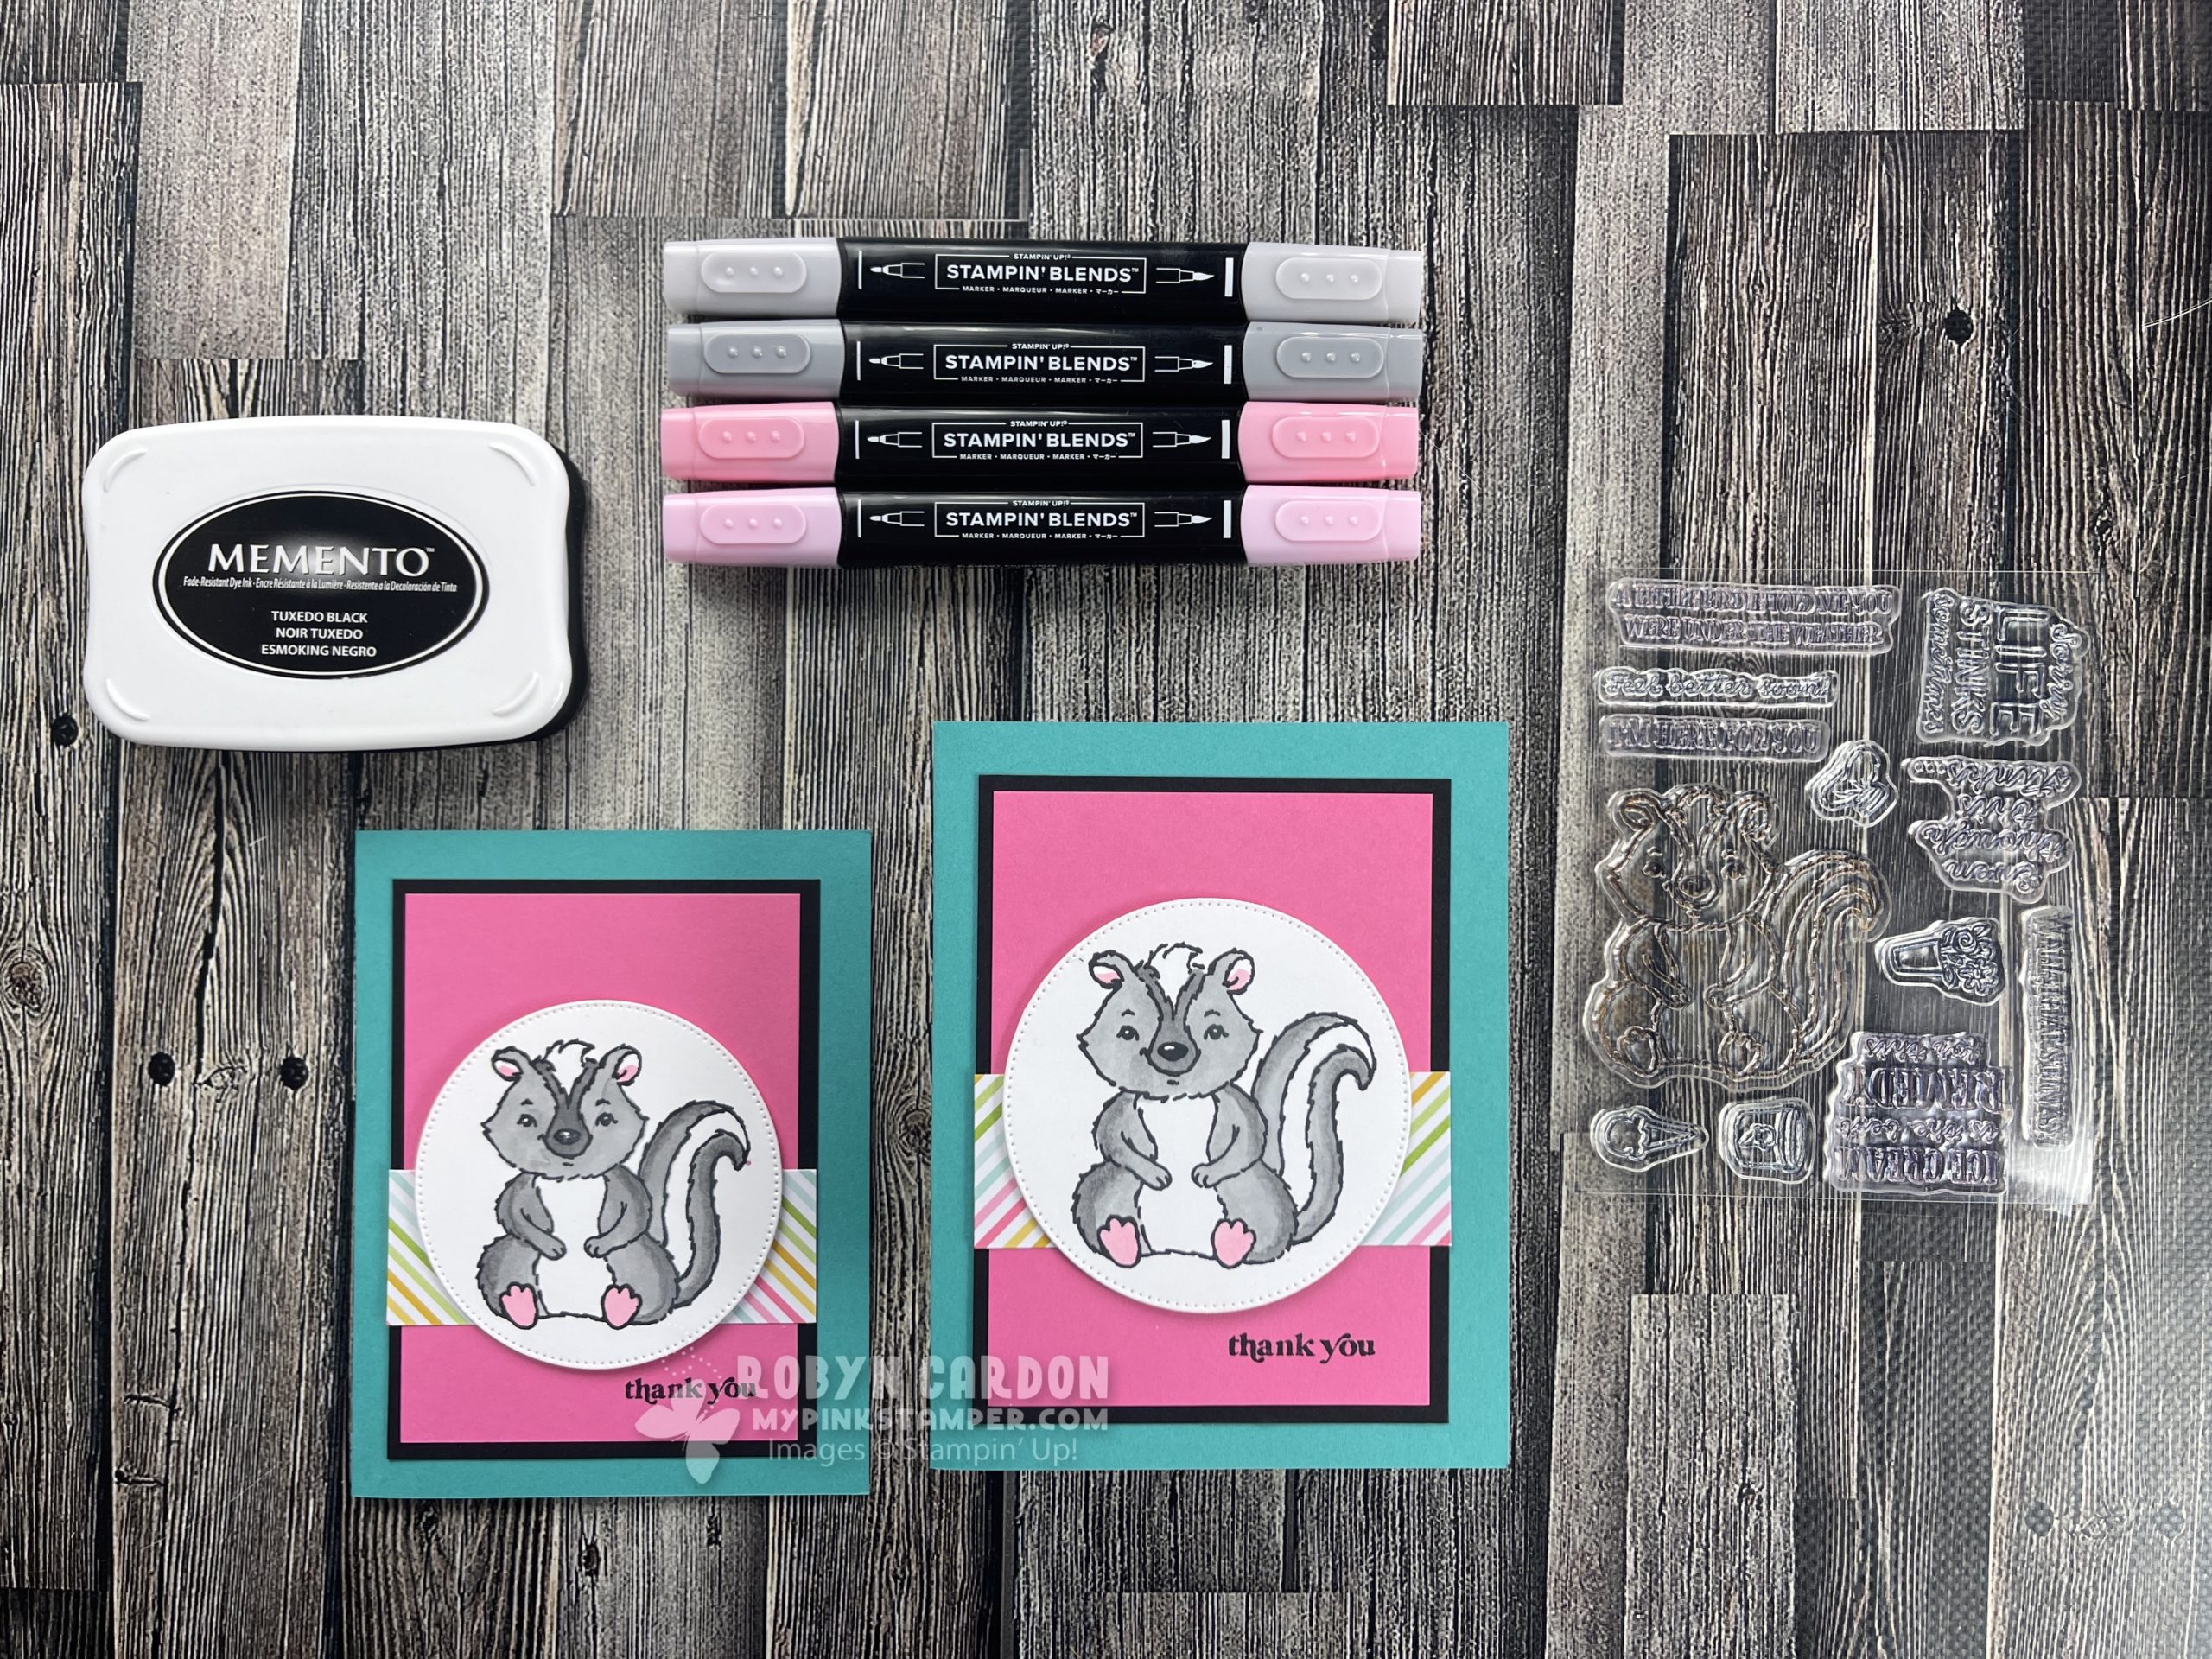 Stampin’ Up! The Best Remedy Kit Alternate Card